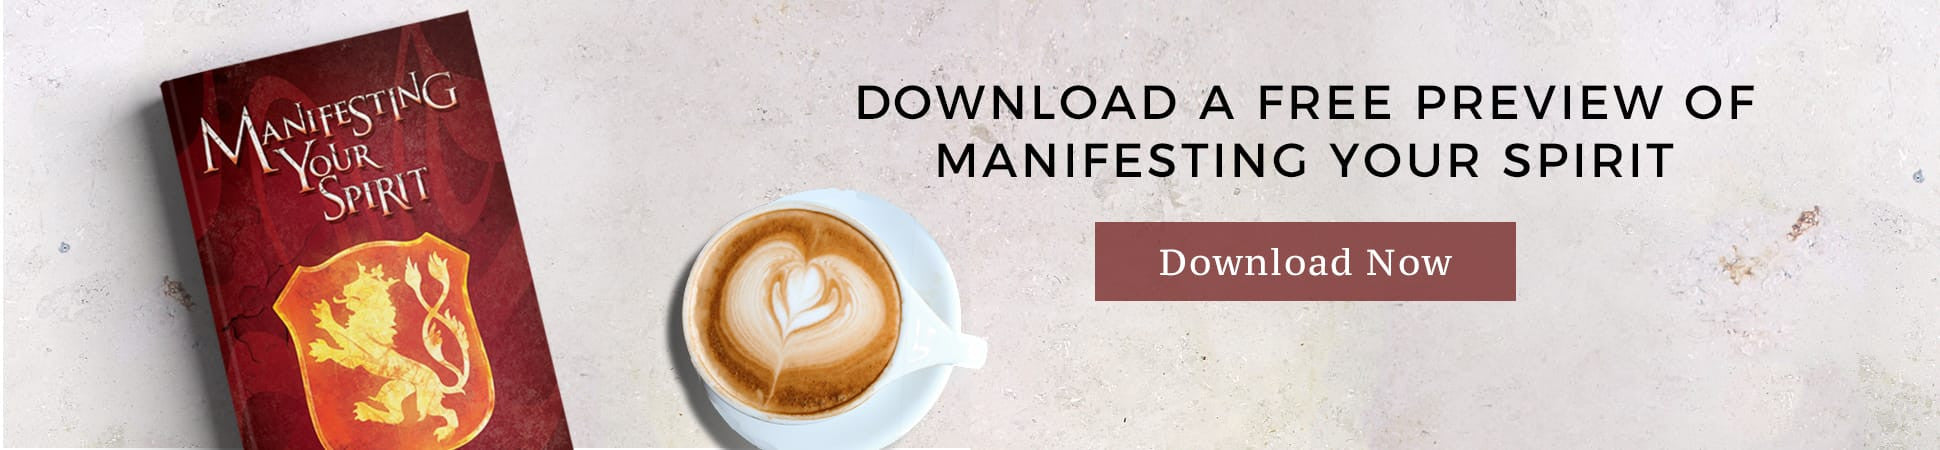 Manifesting Your Spirit FREE preview